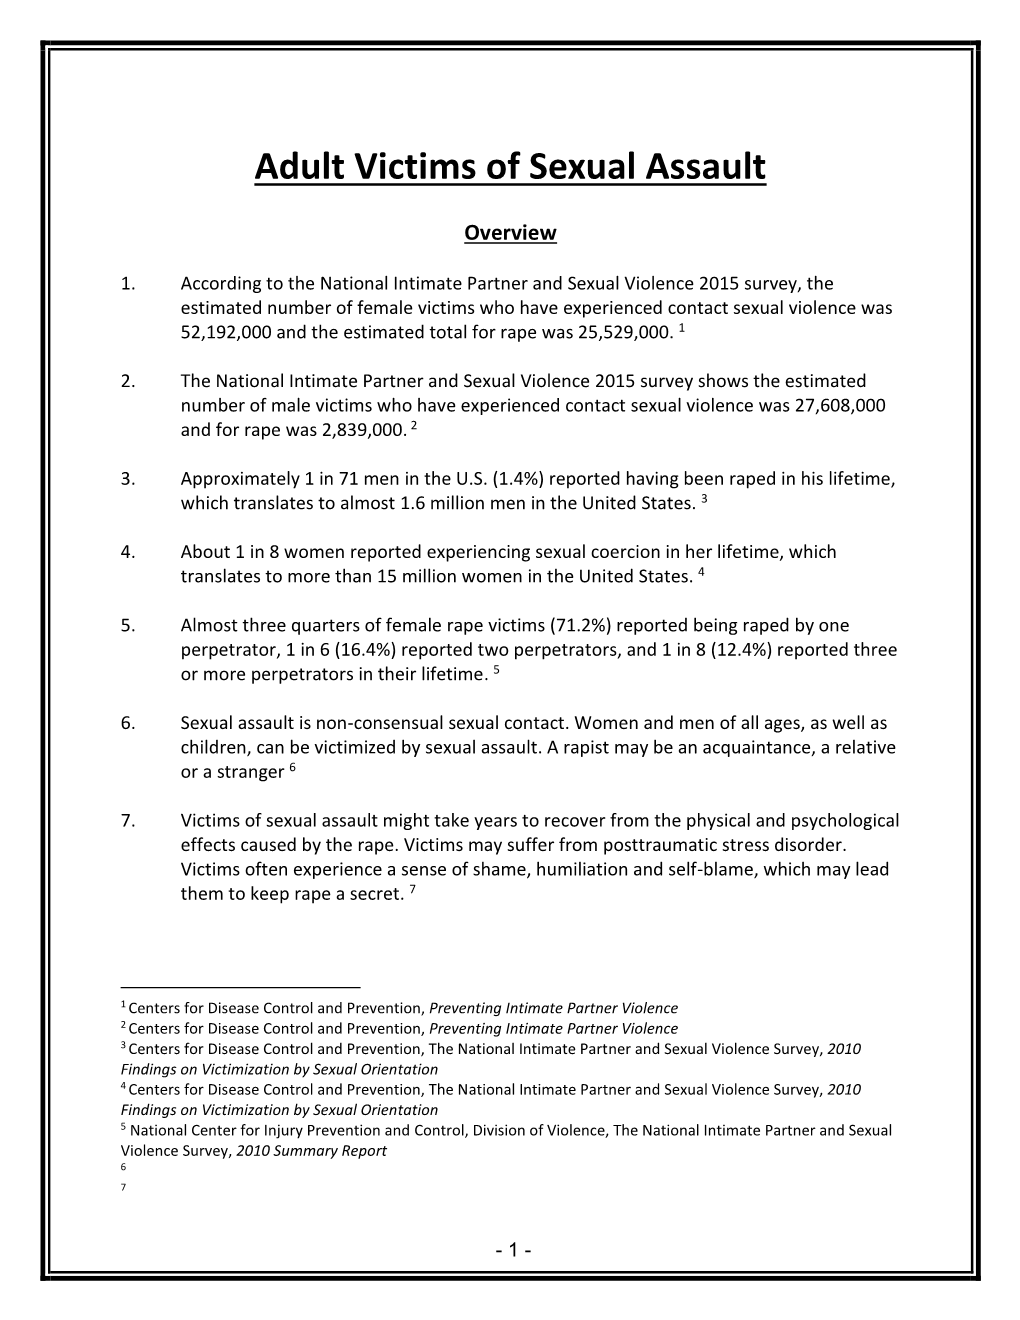 Adult Victims of Sexual Assault 2020